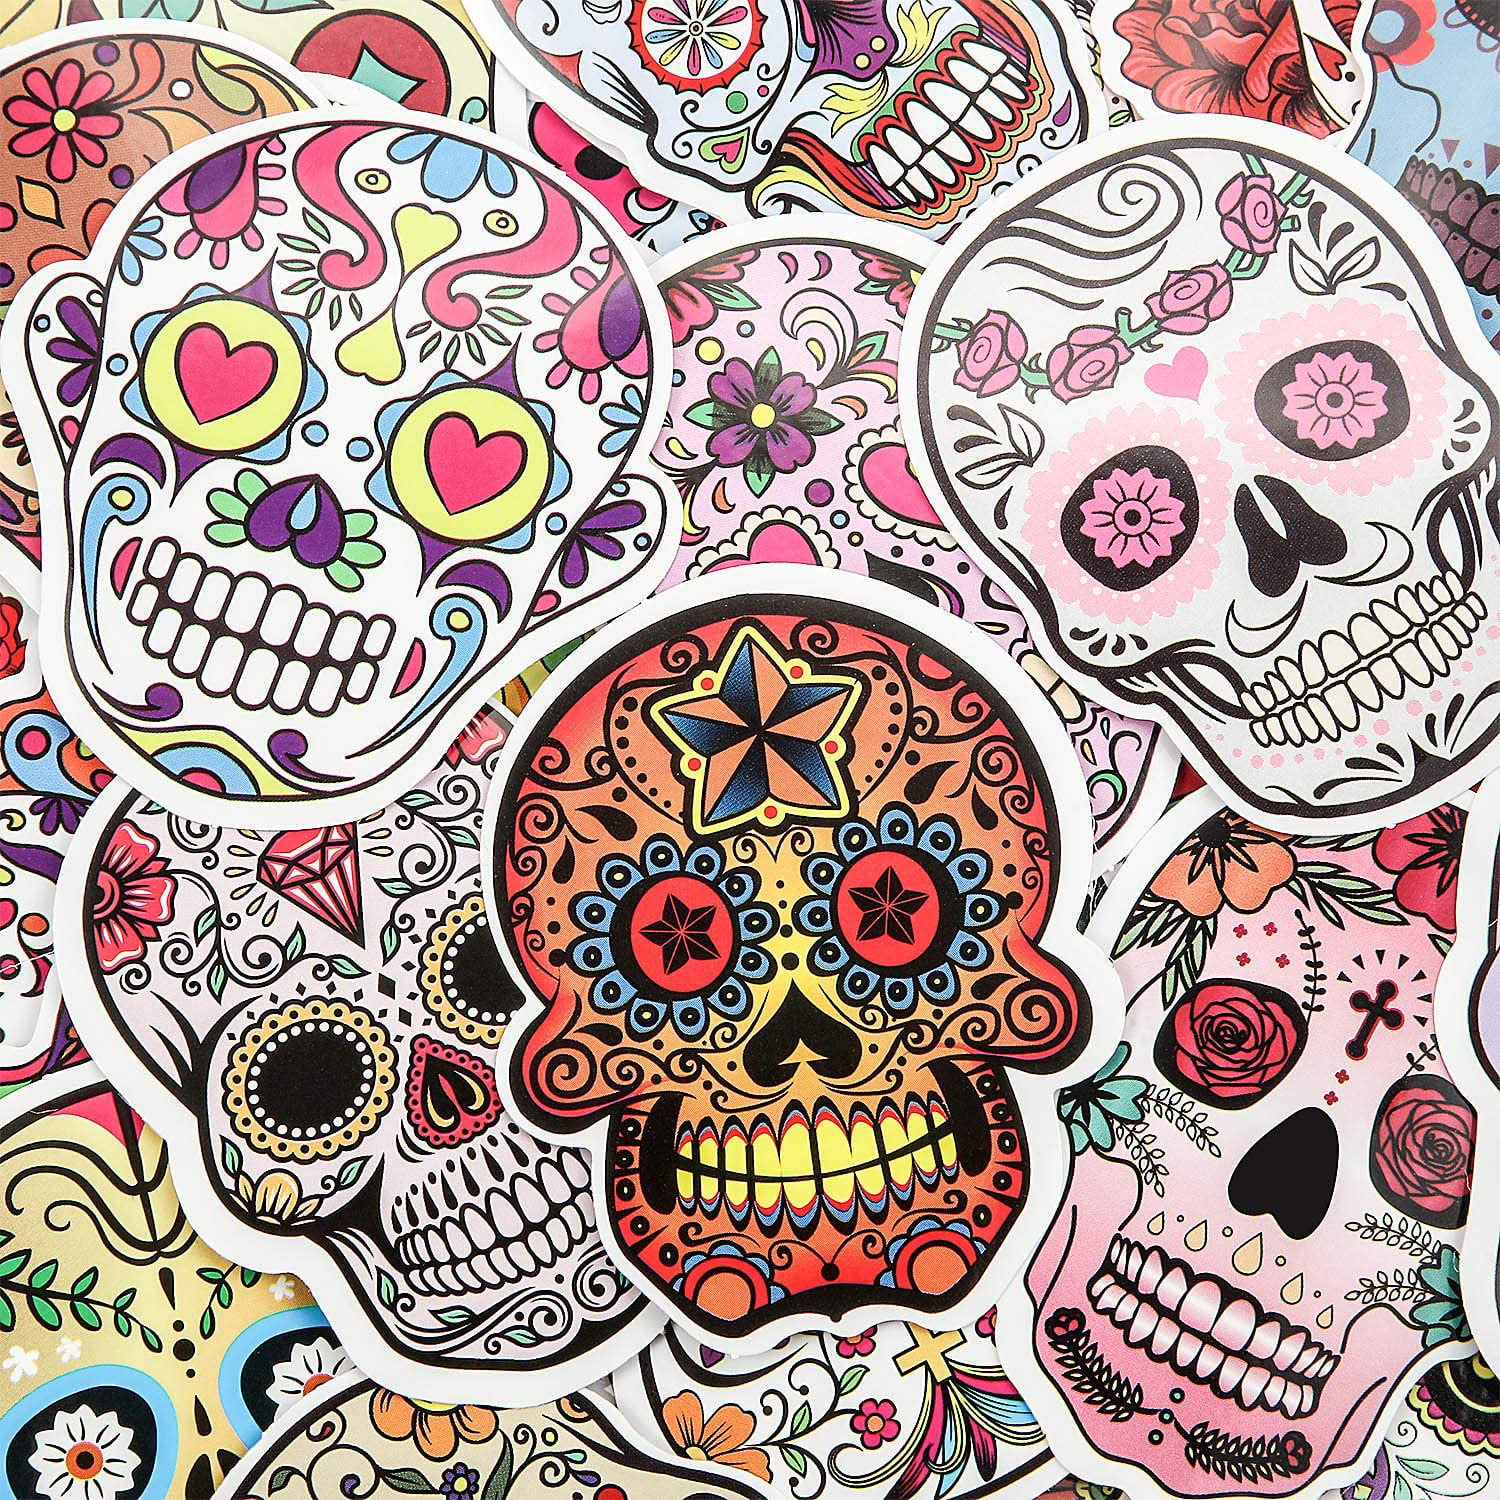 Luggage 180 Pieces Laptop Skull Decals for Dia De Los Muertos Bike Sugar Skull Stickers Pack Skateboard Vinyl Decal Pack Mexican Day of Dead Sticker for Water Bottle Computer 60 Styles 